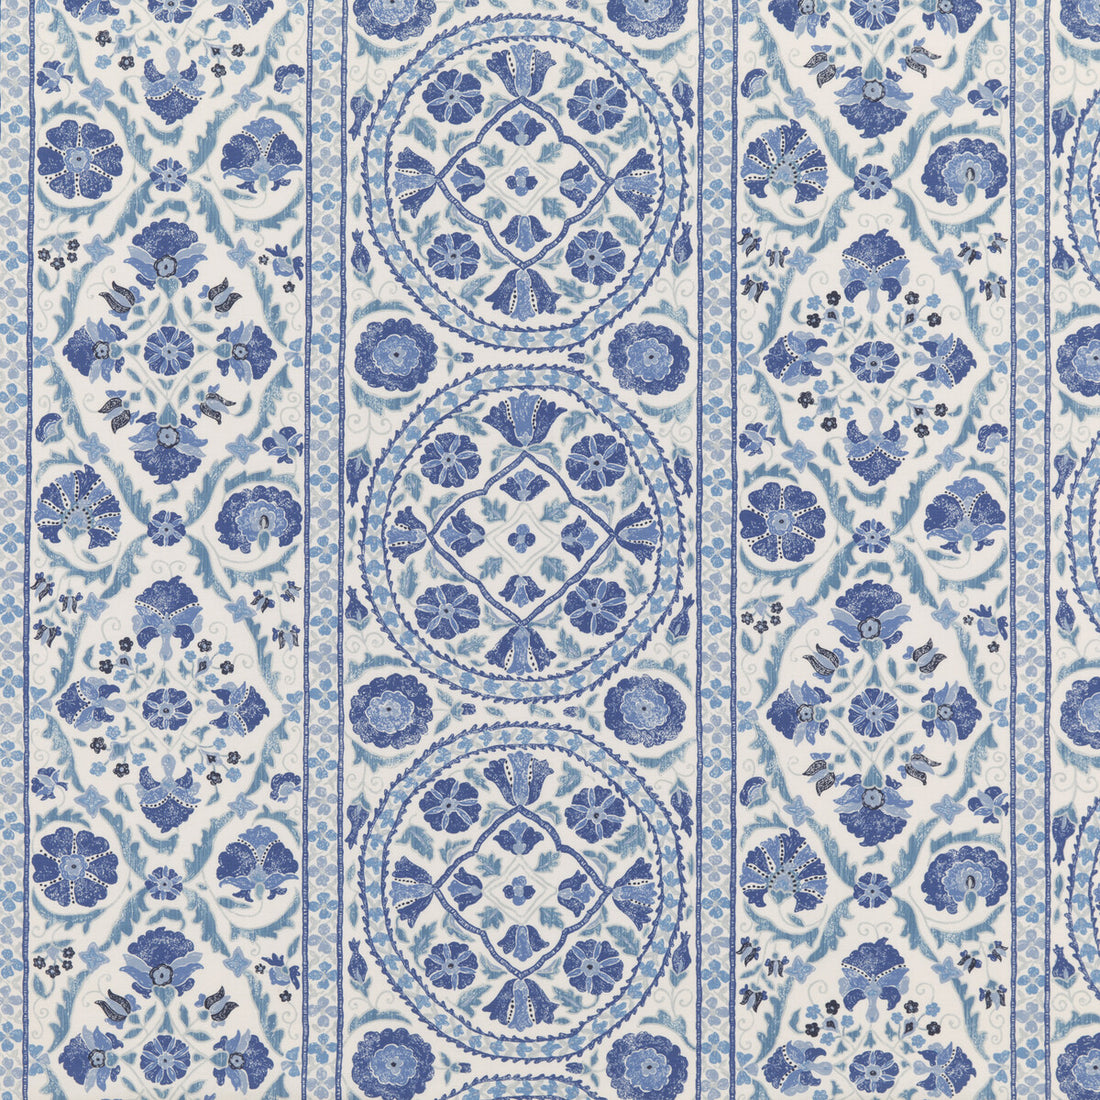 Bokhara Susani fabric in porcelain color - pattern 8018121.5.0 - by Brunschwig &amp; Fils in the Baret collection